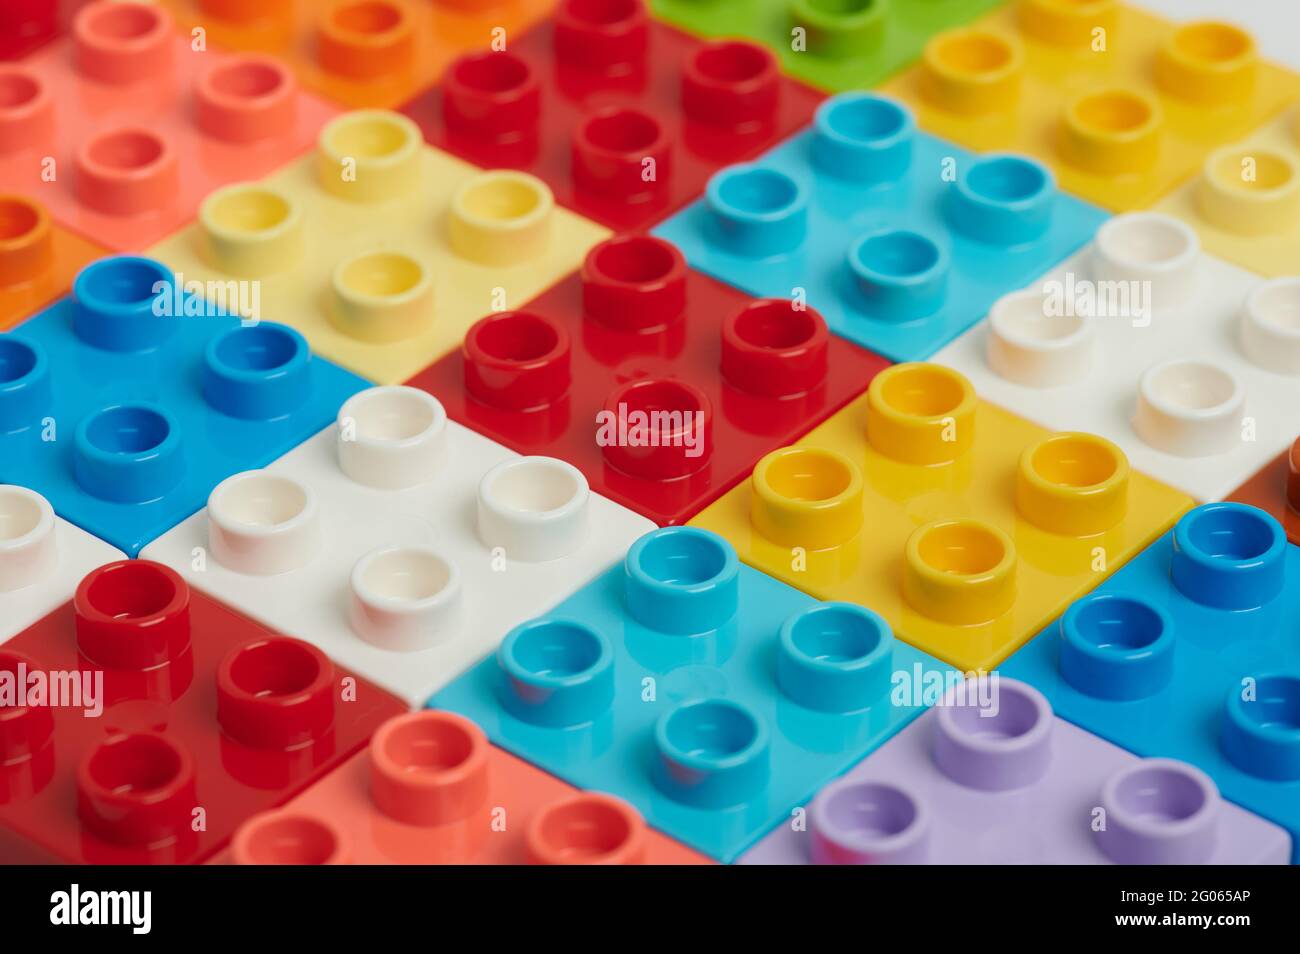 Set of colorful plastic bricks background close up view Stock Photo